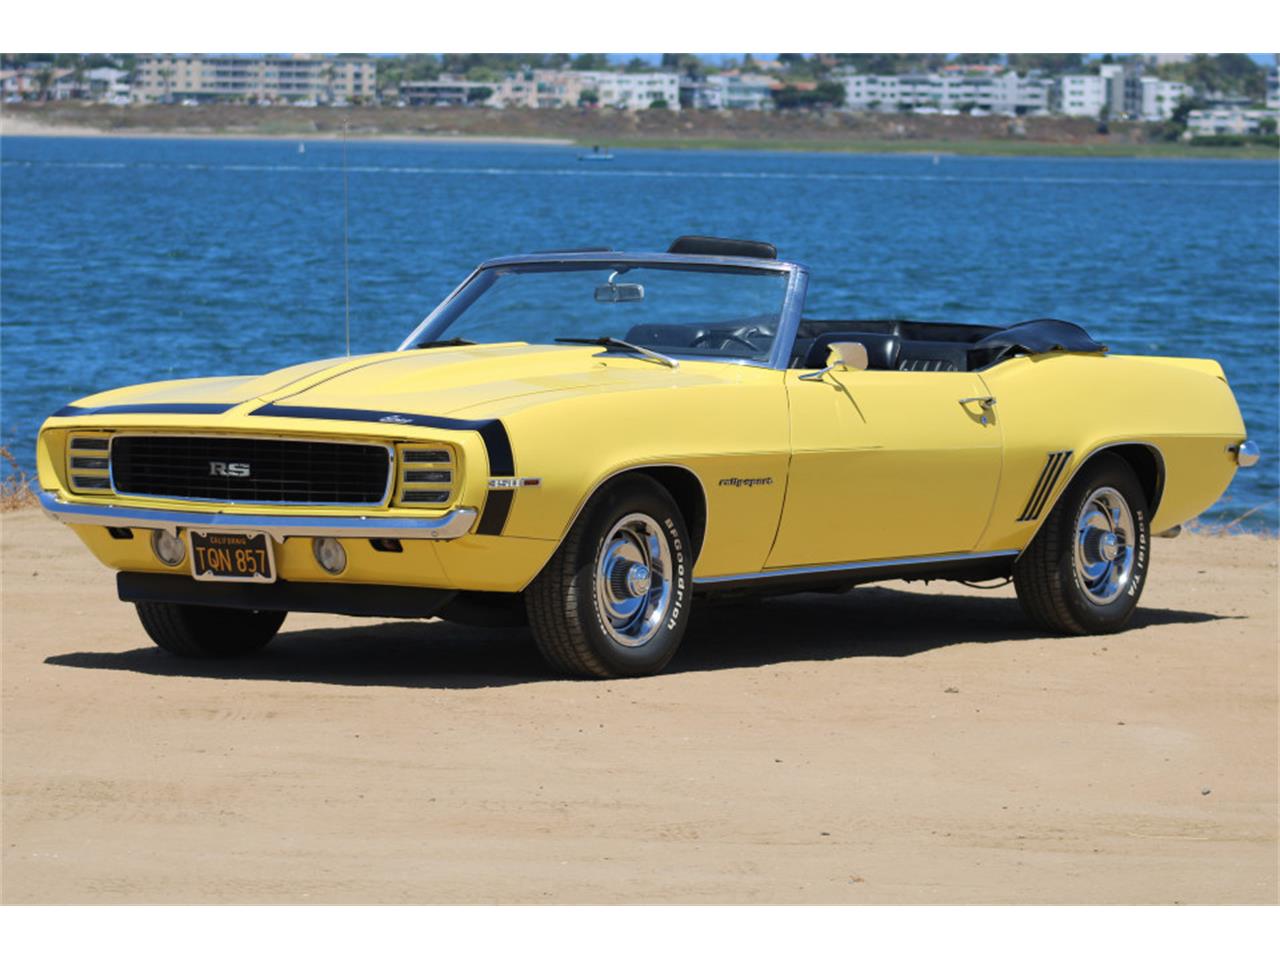 For Sale: 1969 Chevrolet Camaro RS in SAN DIEGO, California for sale in San Diego, CA